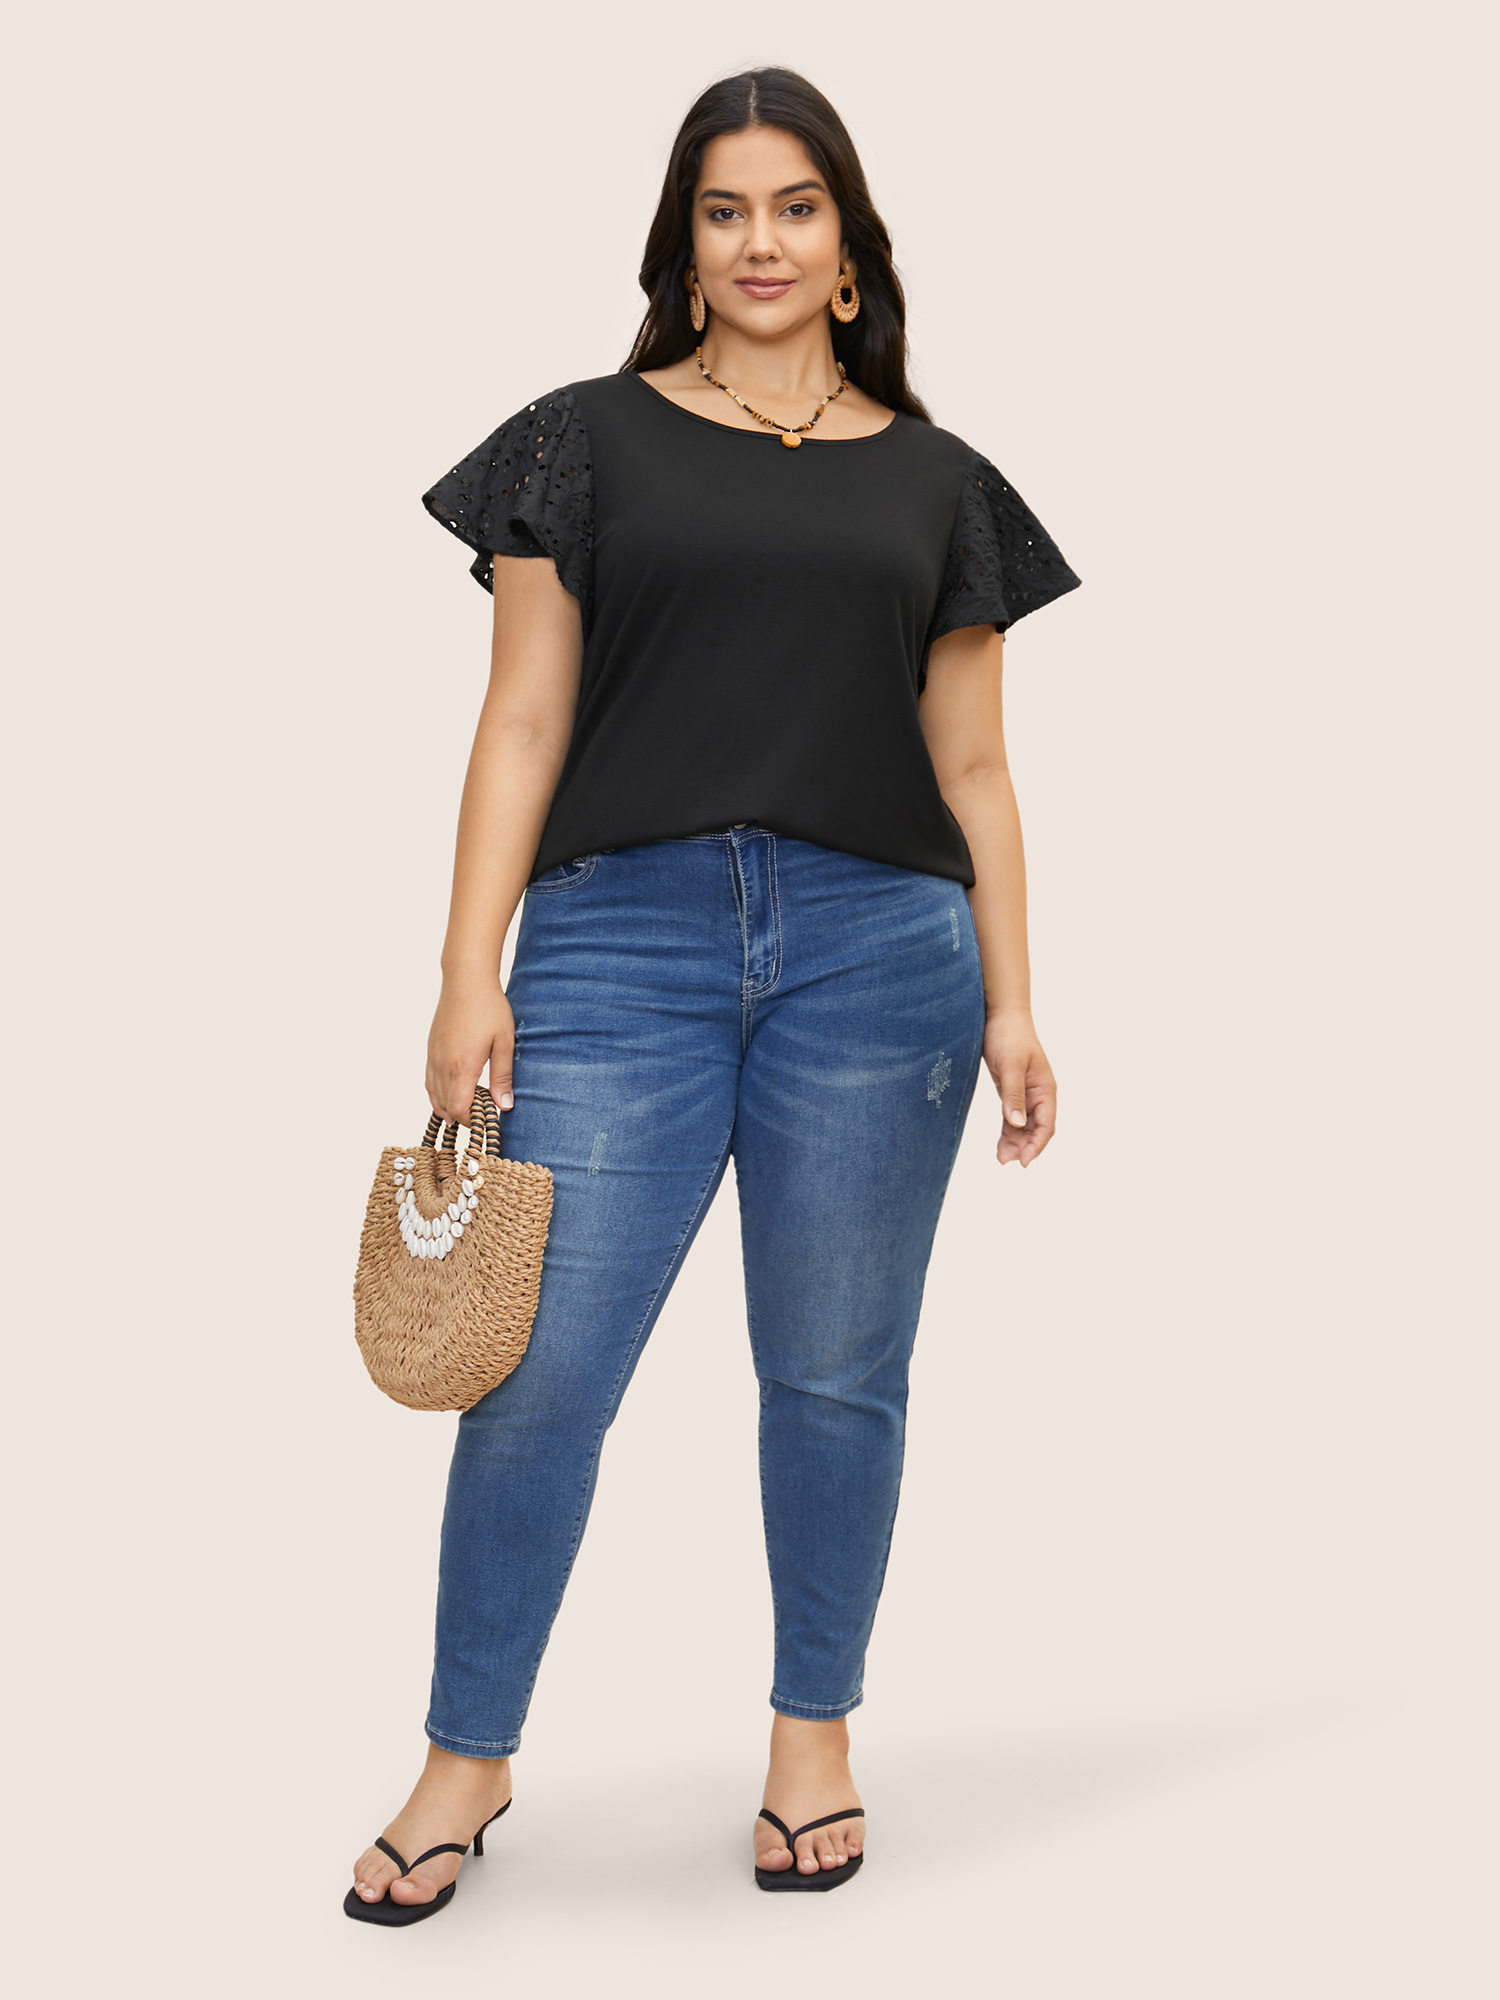 

Plus Size Solid Broderie Anglaise Ruffle Cap Sleeve T-shirt Black Women Resort Cut-Out Round Neck Vacation T-shirts BloomChic